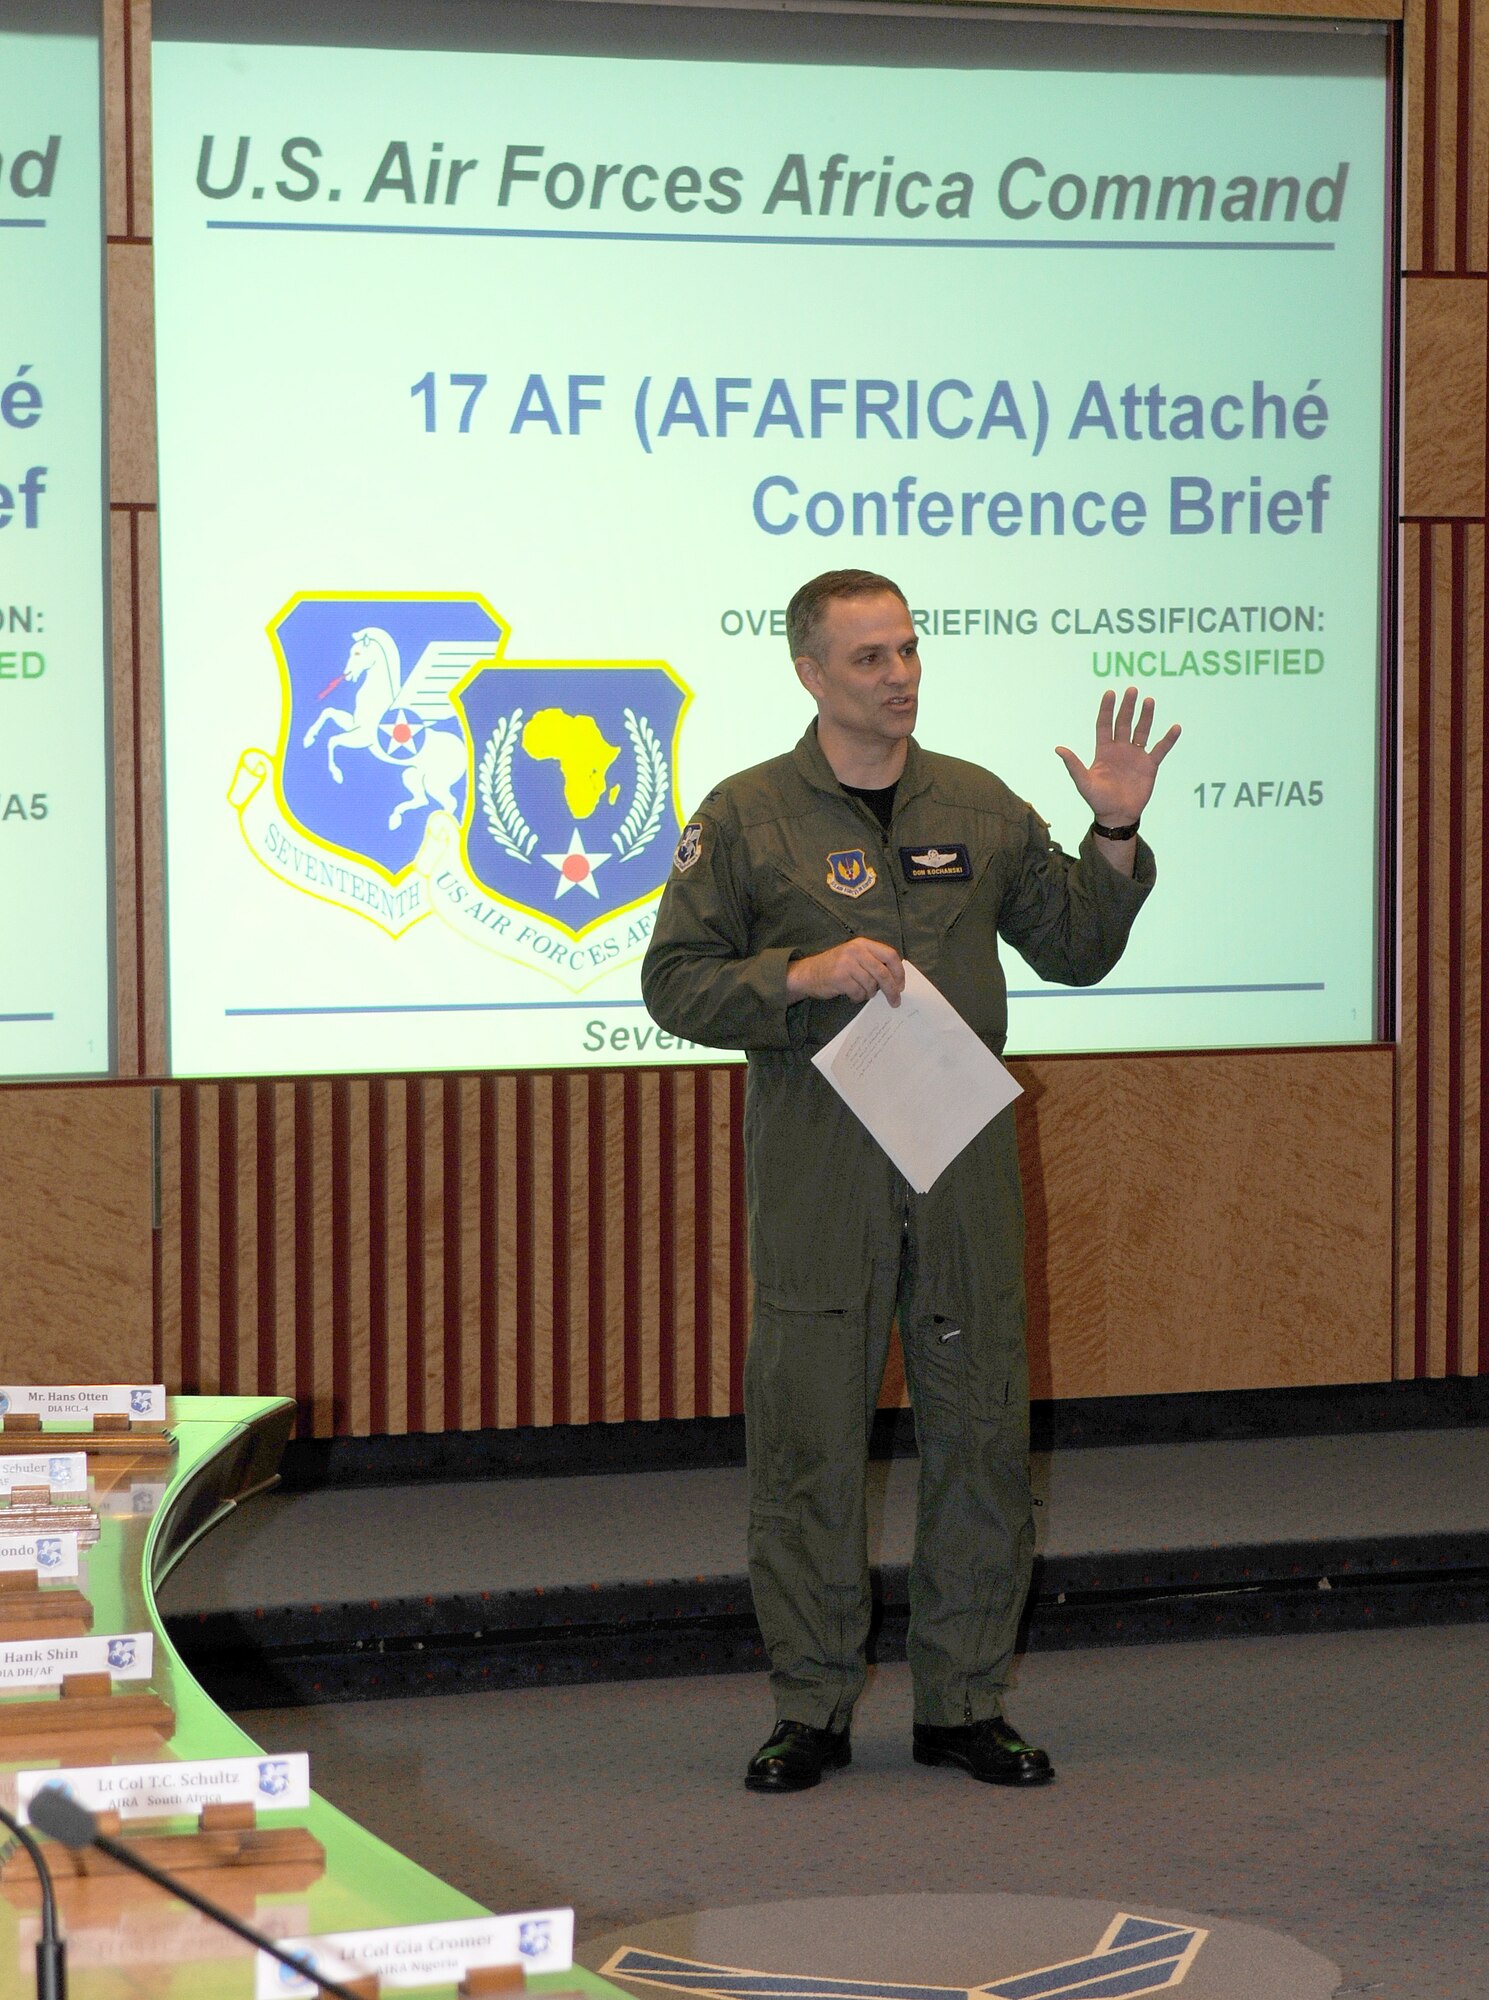 RAMSTEIN AIR BASE, Germany -- Lt. Col. Don Kochanski, Seventeenth Air Force Director of A5 (Plans), gives an opening briefing to assembled air attaches assigned to African nations Feb. 24 here. The briefing was part of the African Air Attaches conference held Feb. 23-27 at Ramstein. This was the first year that 17th AF, the air component for U.S. Africa Command, took part. Attaches and members of 17th AF, along with the Office of the Secretary of The Air Force for International Affairs, shared information and collaborated on maximizing effectiveness. (USAF Photo by Master Sgt. Jim Fisher)